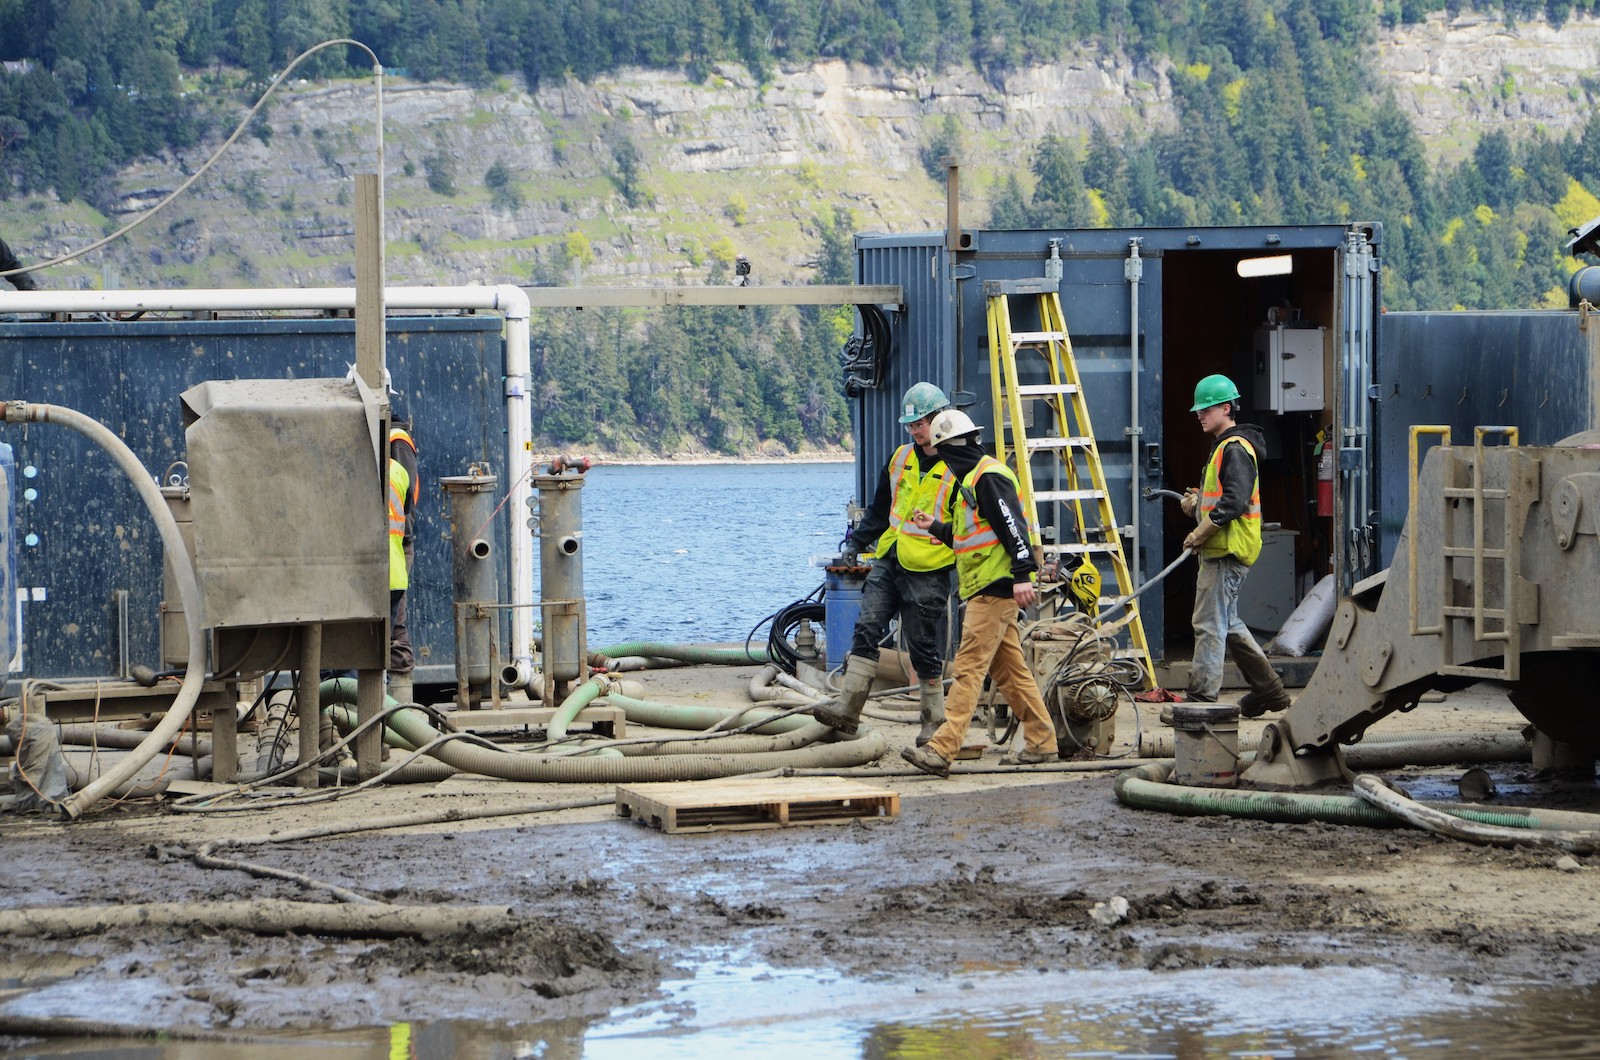 Workers in hard hats and high-vis vests walk through the muddy yard of a plant on the water’s edge.